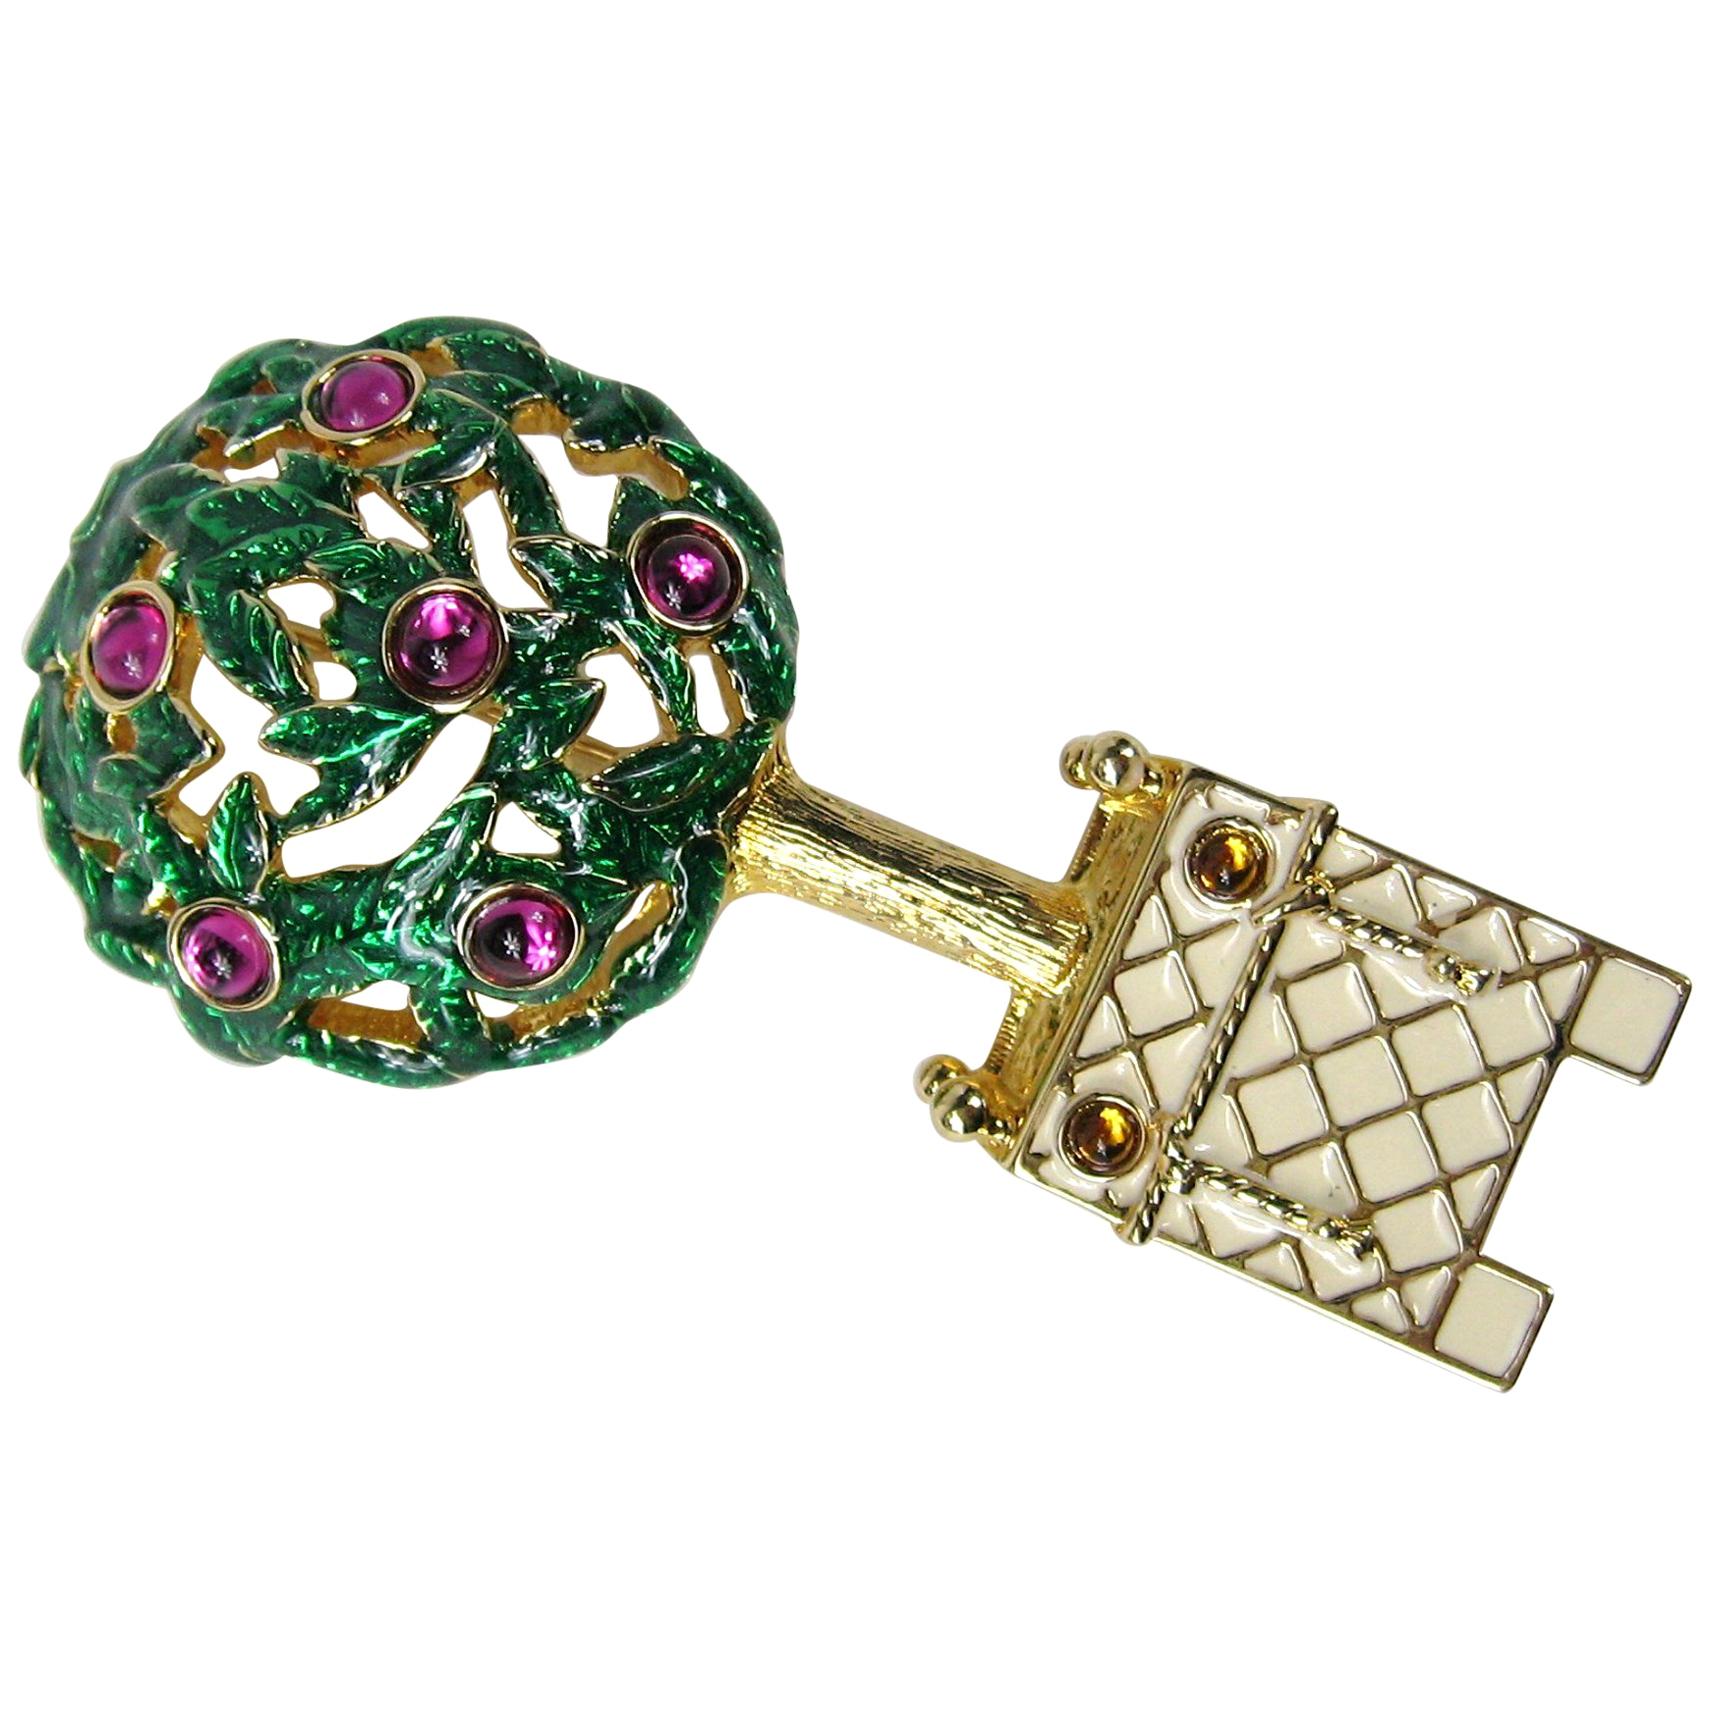  Swarovski Crystal Enameled Tree Brooch Pin New,  Never worn 1980s For Sale